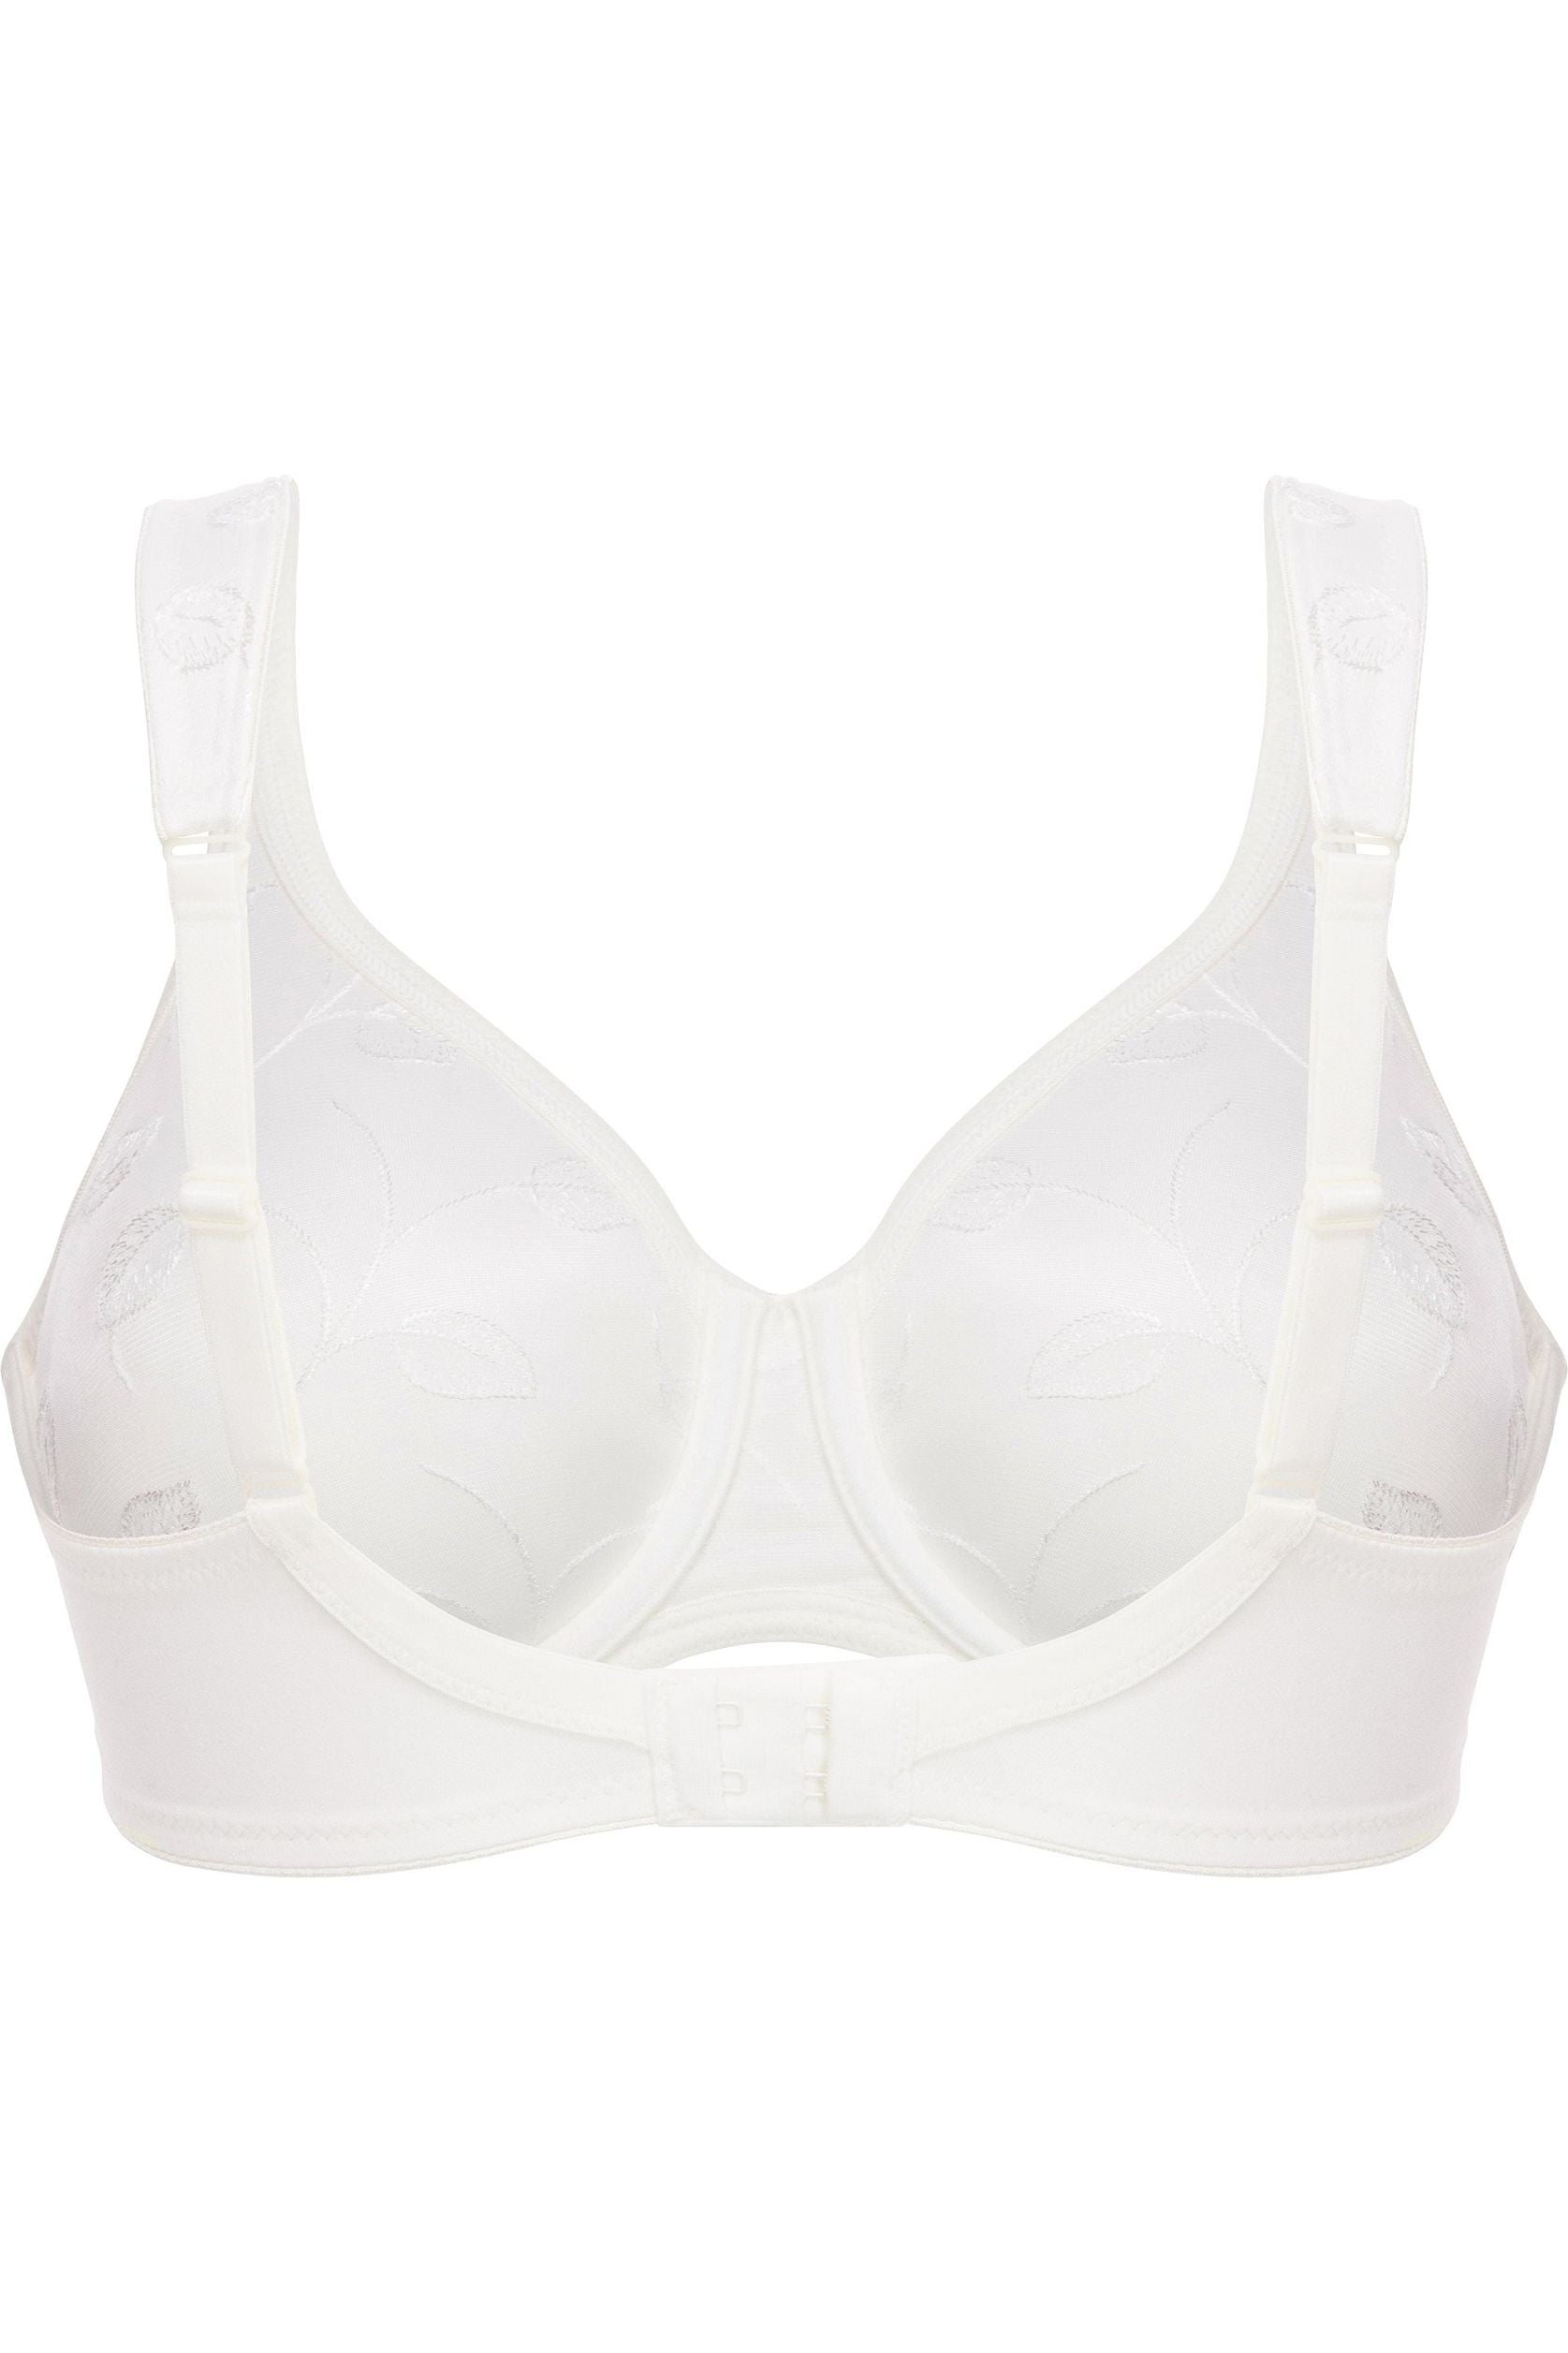 Felina Moments underwired bra (95 E, Single pack) - buy at Galaxus